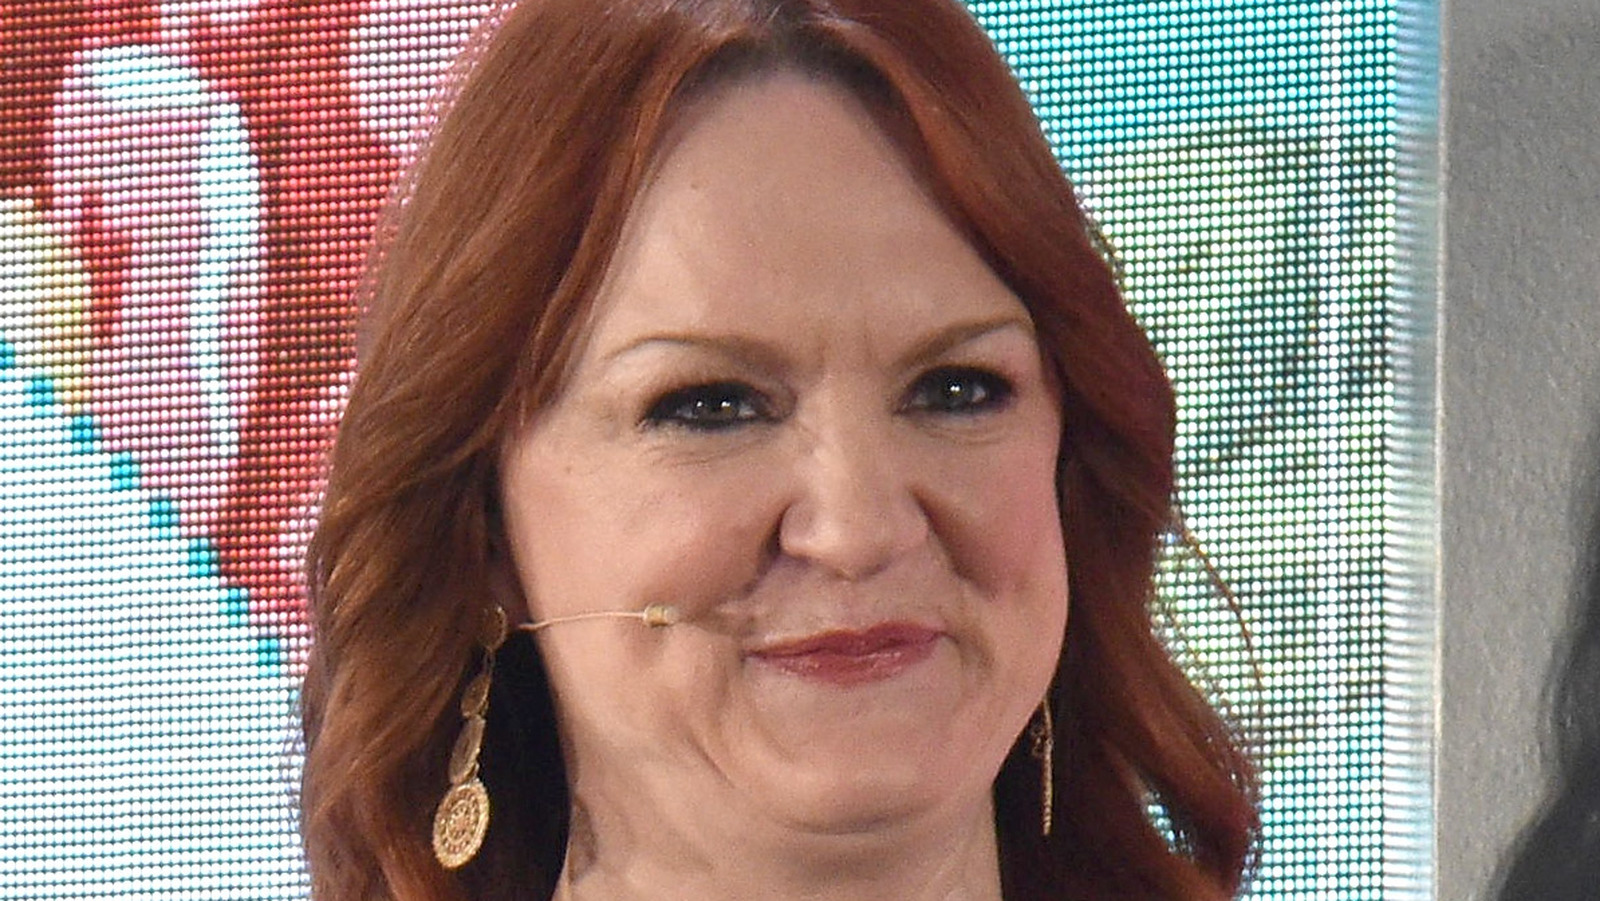 https://www.thelist.com/img/gallery/the-unwelcome-guest-that-freaked-out-pioneer-woman-ree-drummond/l-intro-1612739130.jpg